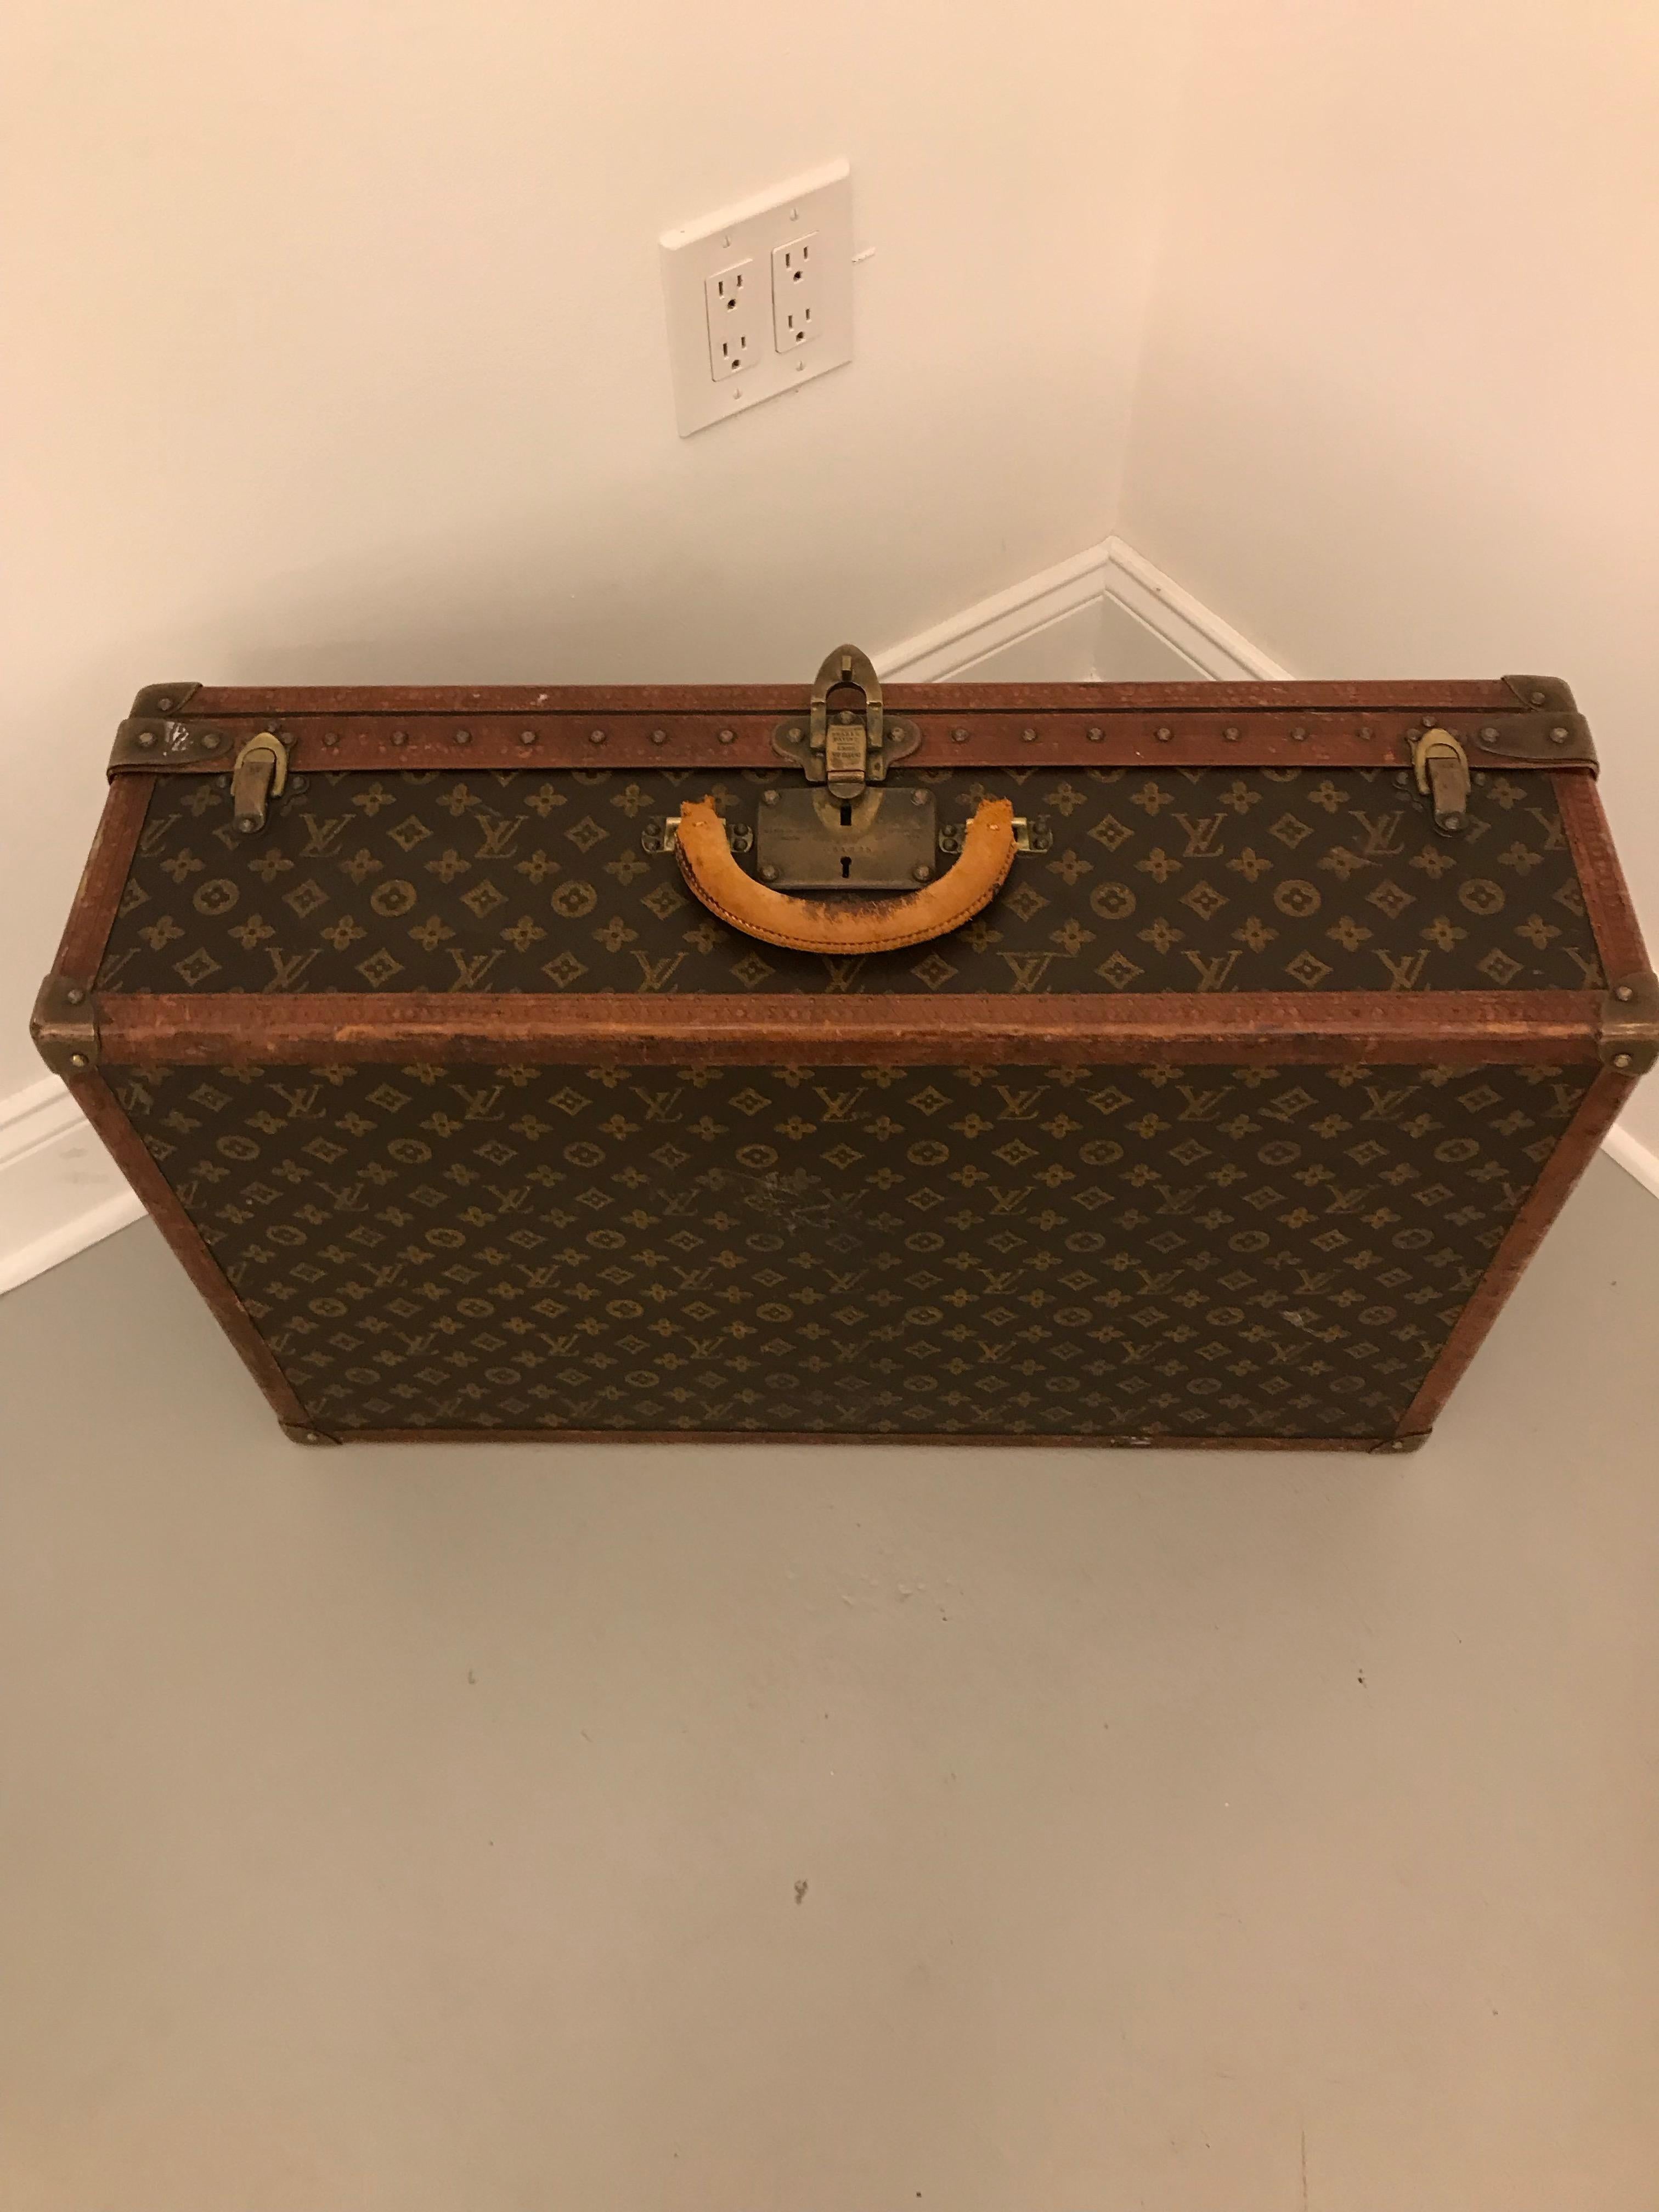 Louis Vuitton 70 size serial number 778676, bought from Jordan Marsh Co. Boston, some scuffs and expected wear, no key. Must have for any collectors. Adds the perfect decor to any room. Great conversation starter.